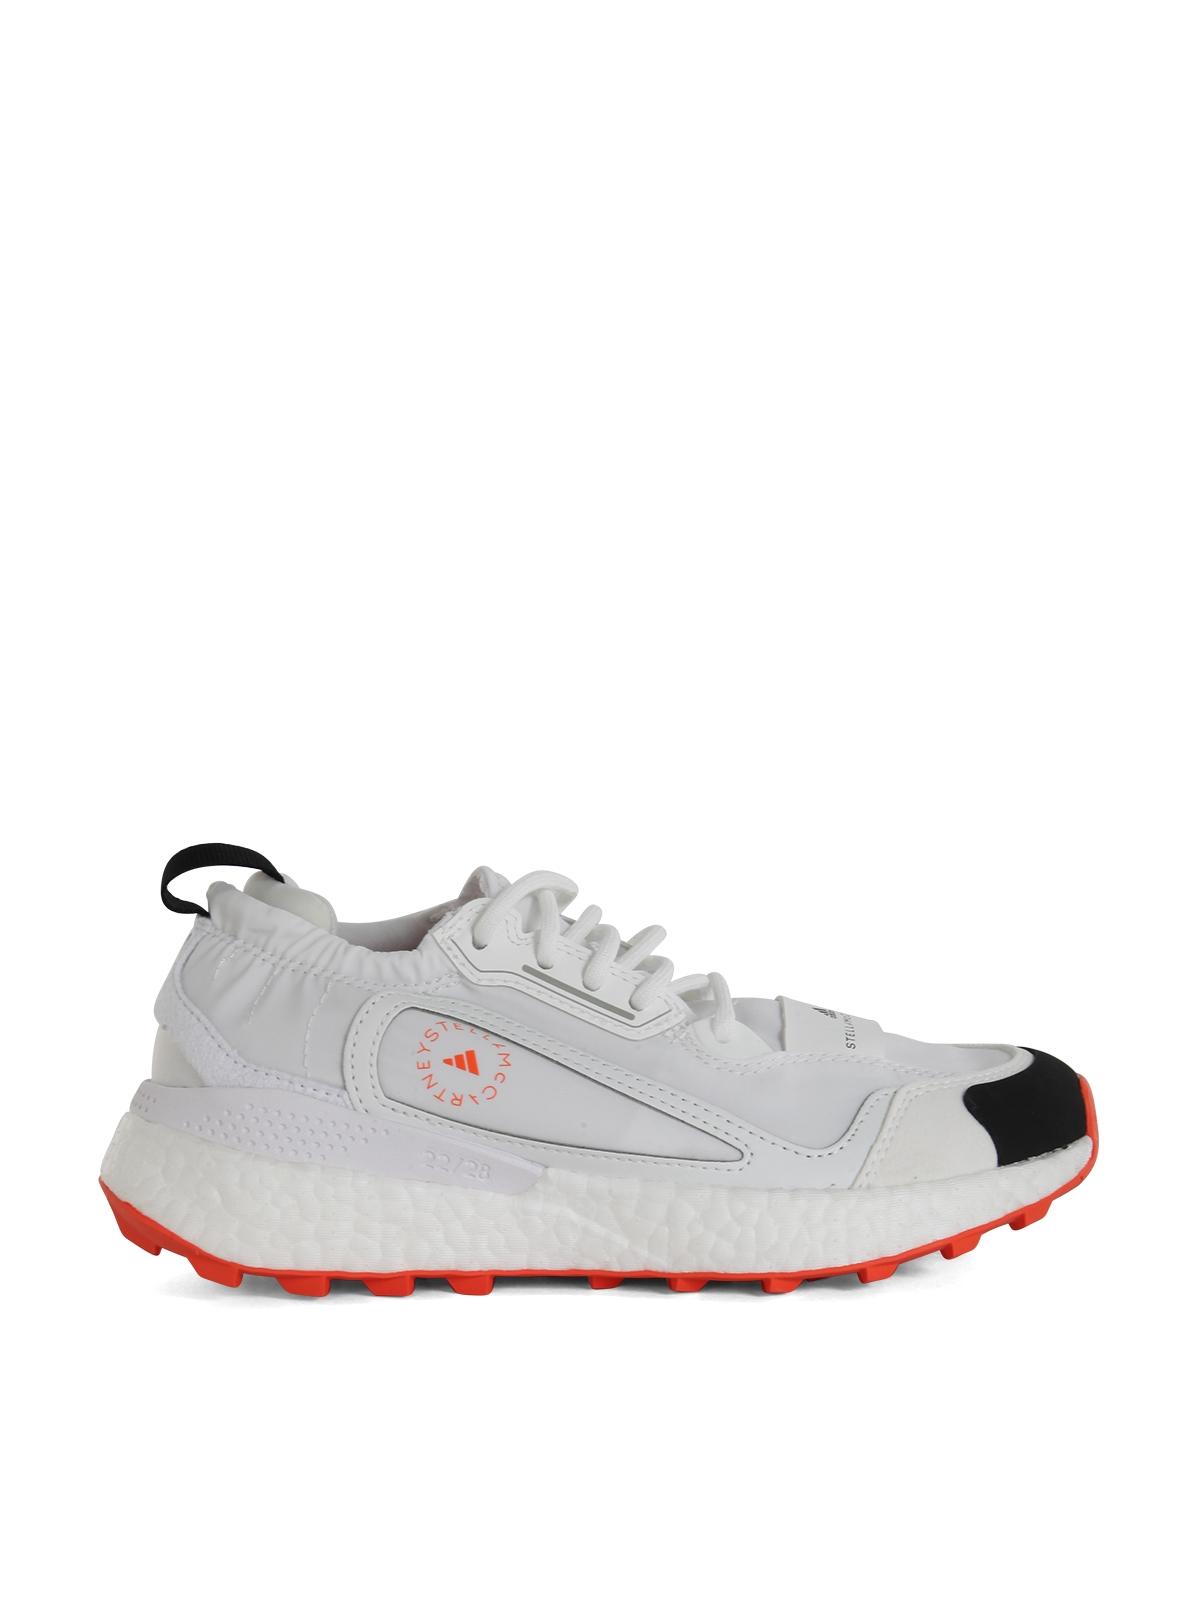 adidas By Stella McCartney Asmc Outdoorboost 2.0 Light Sneakers in White |  Lyst